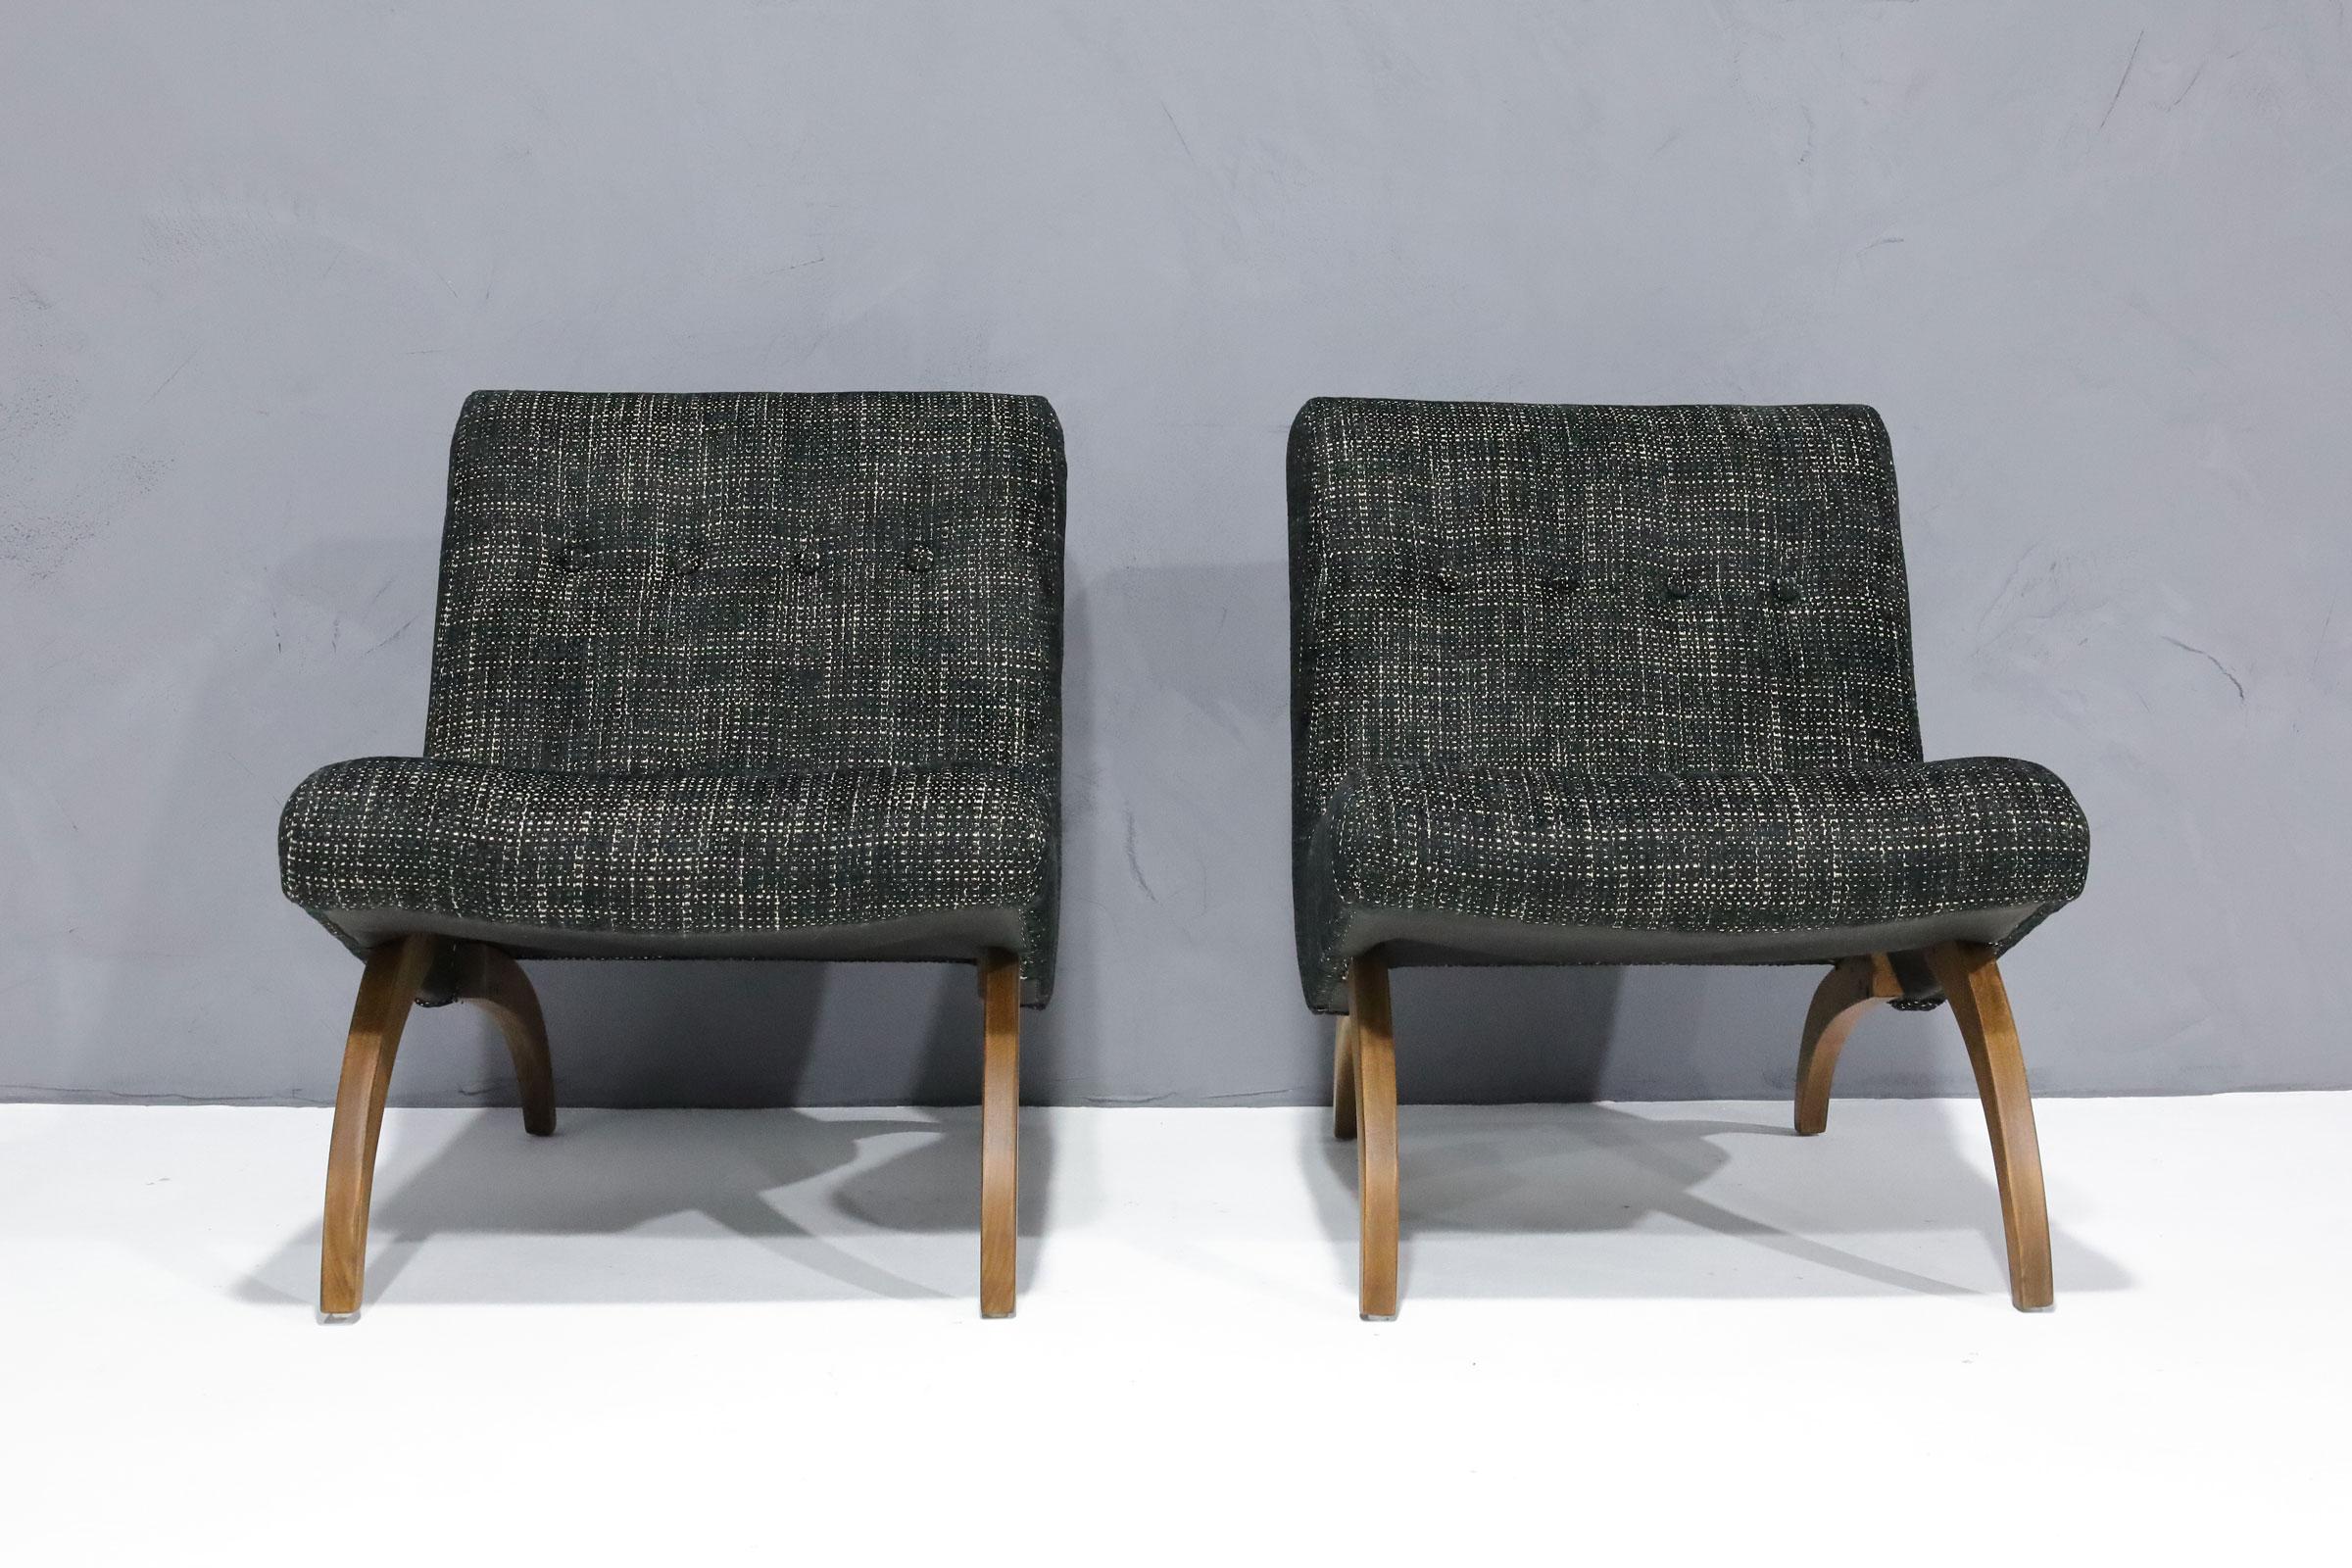 Milo Baughman Scoop Chairs in New Upholstery, 1958 For Sale 3